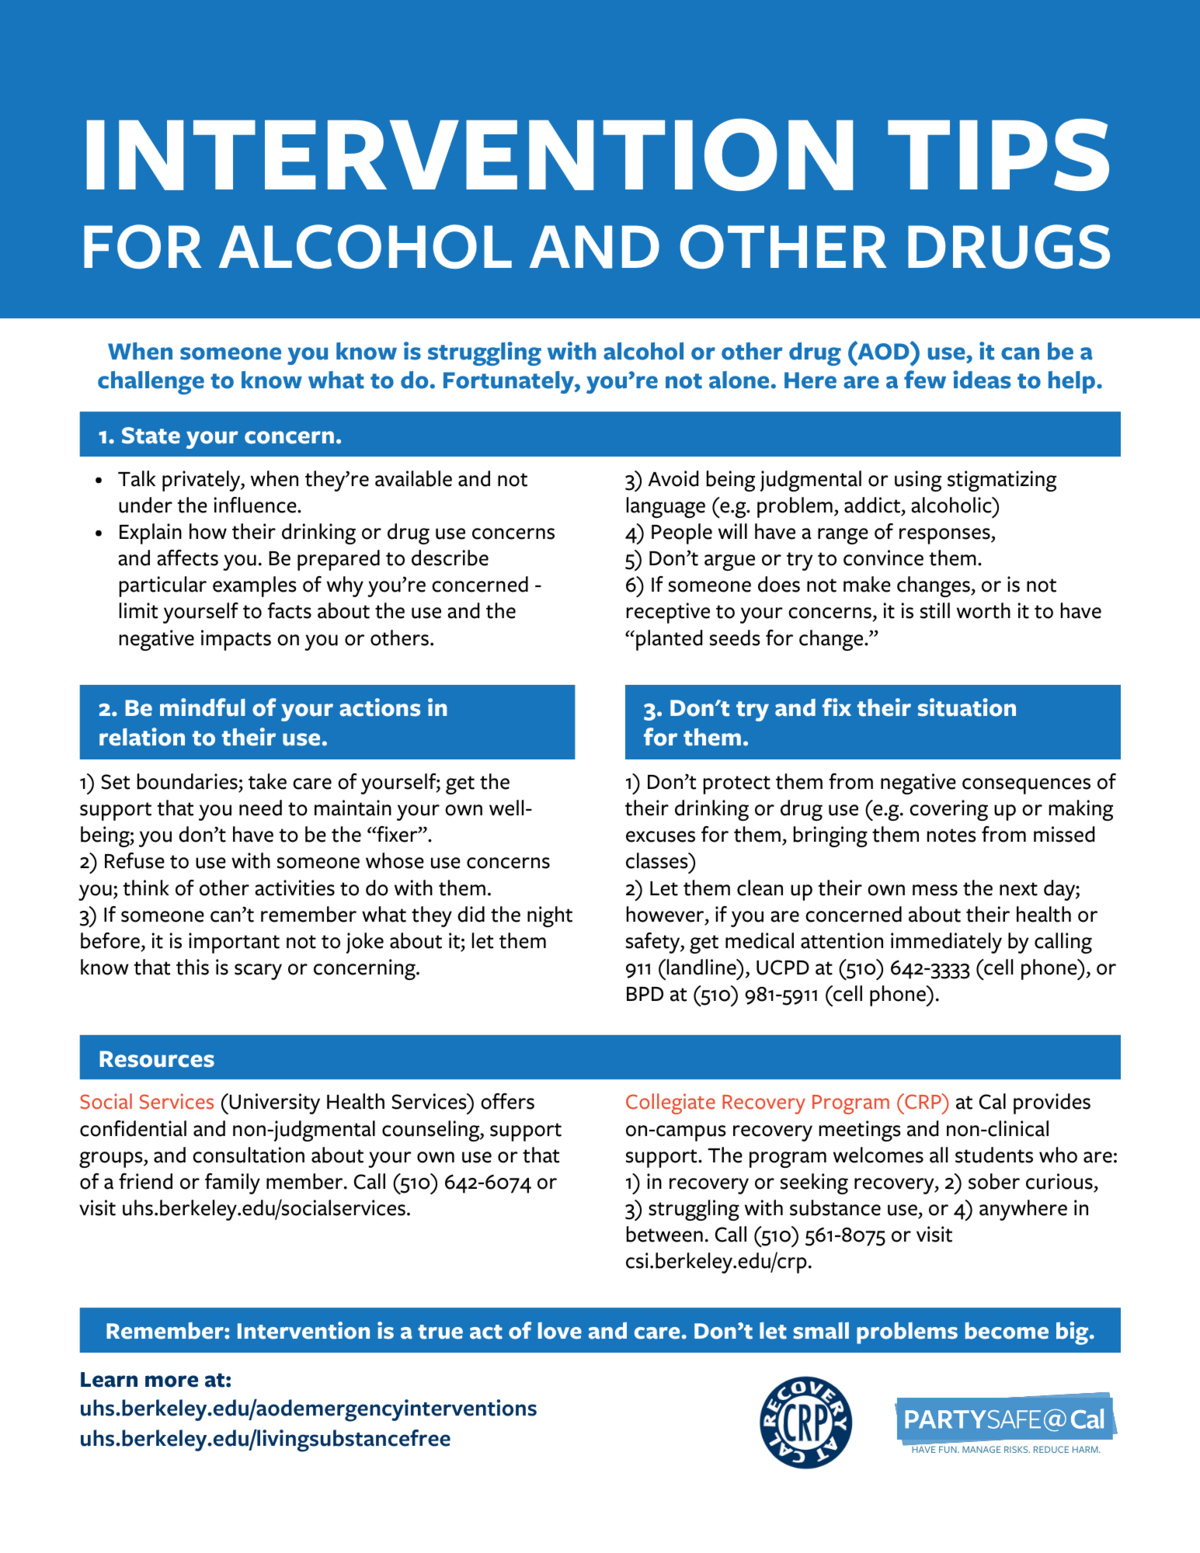 Alcohol and Other Drugs Intervention tips